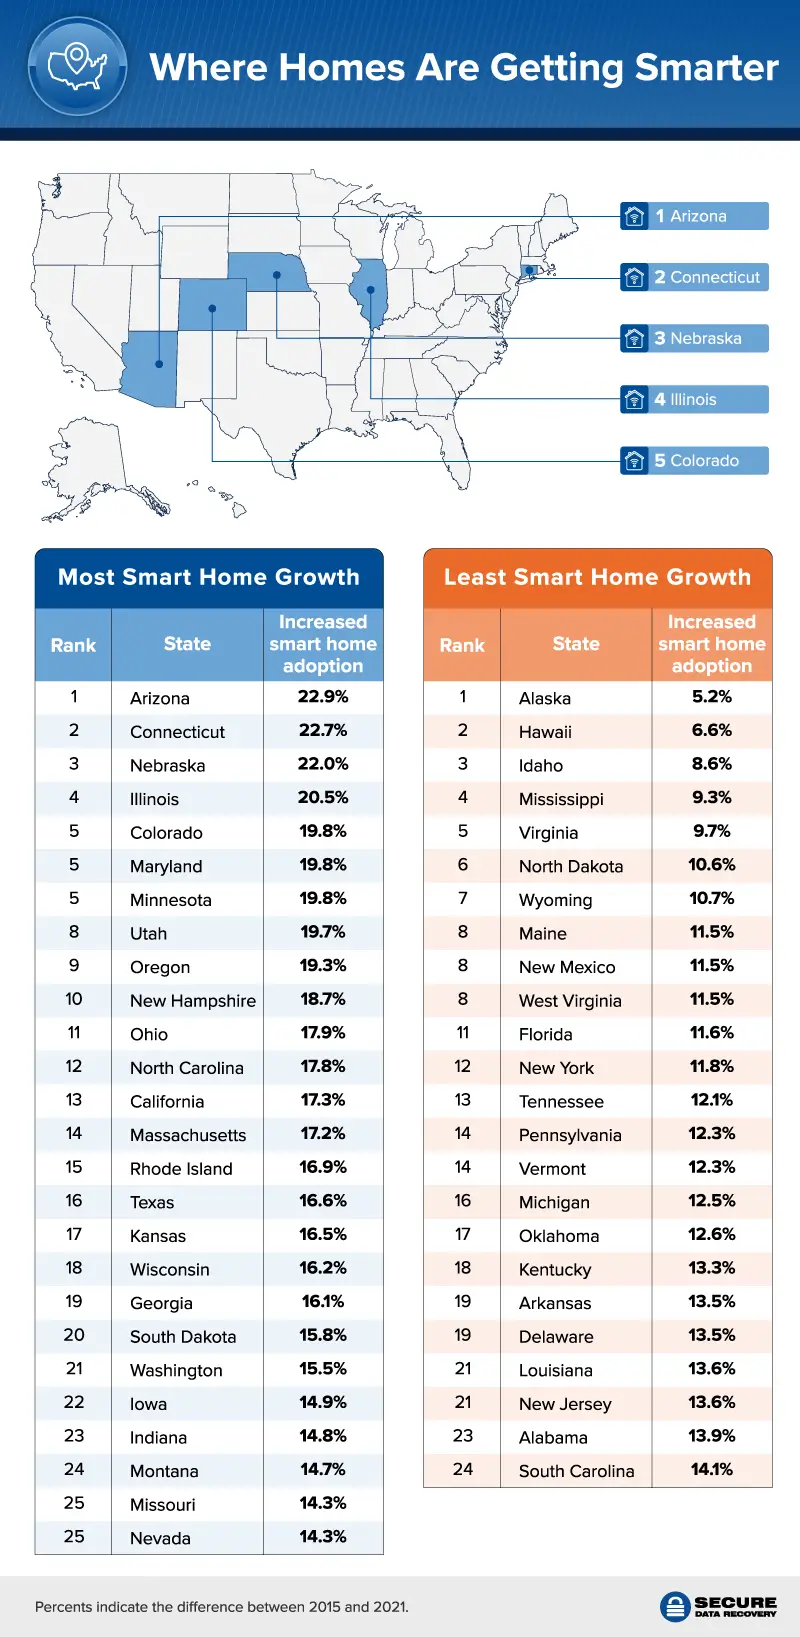 U.S. map depicting the states that have seen the biggest growth in smart home technology use.